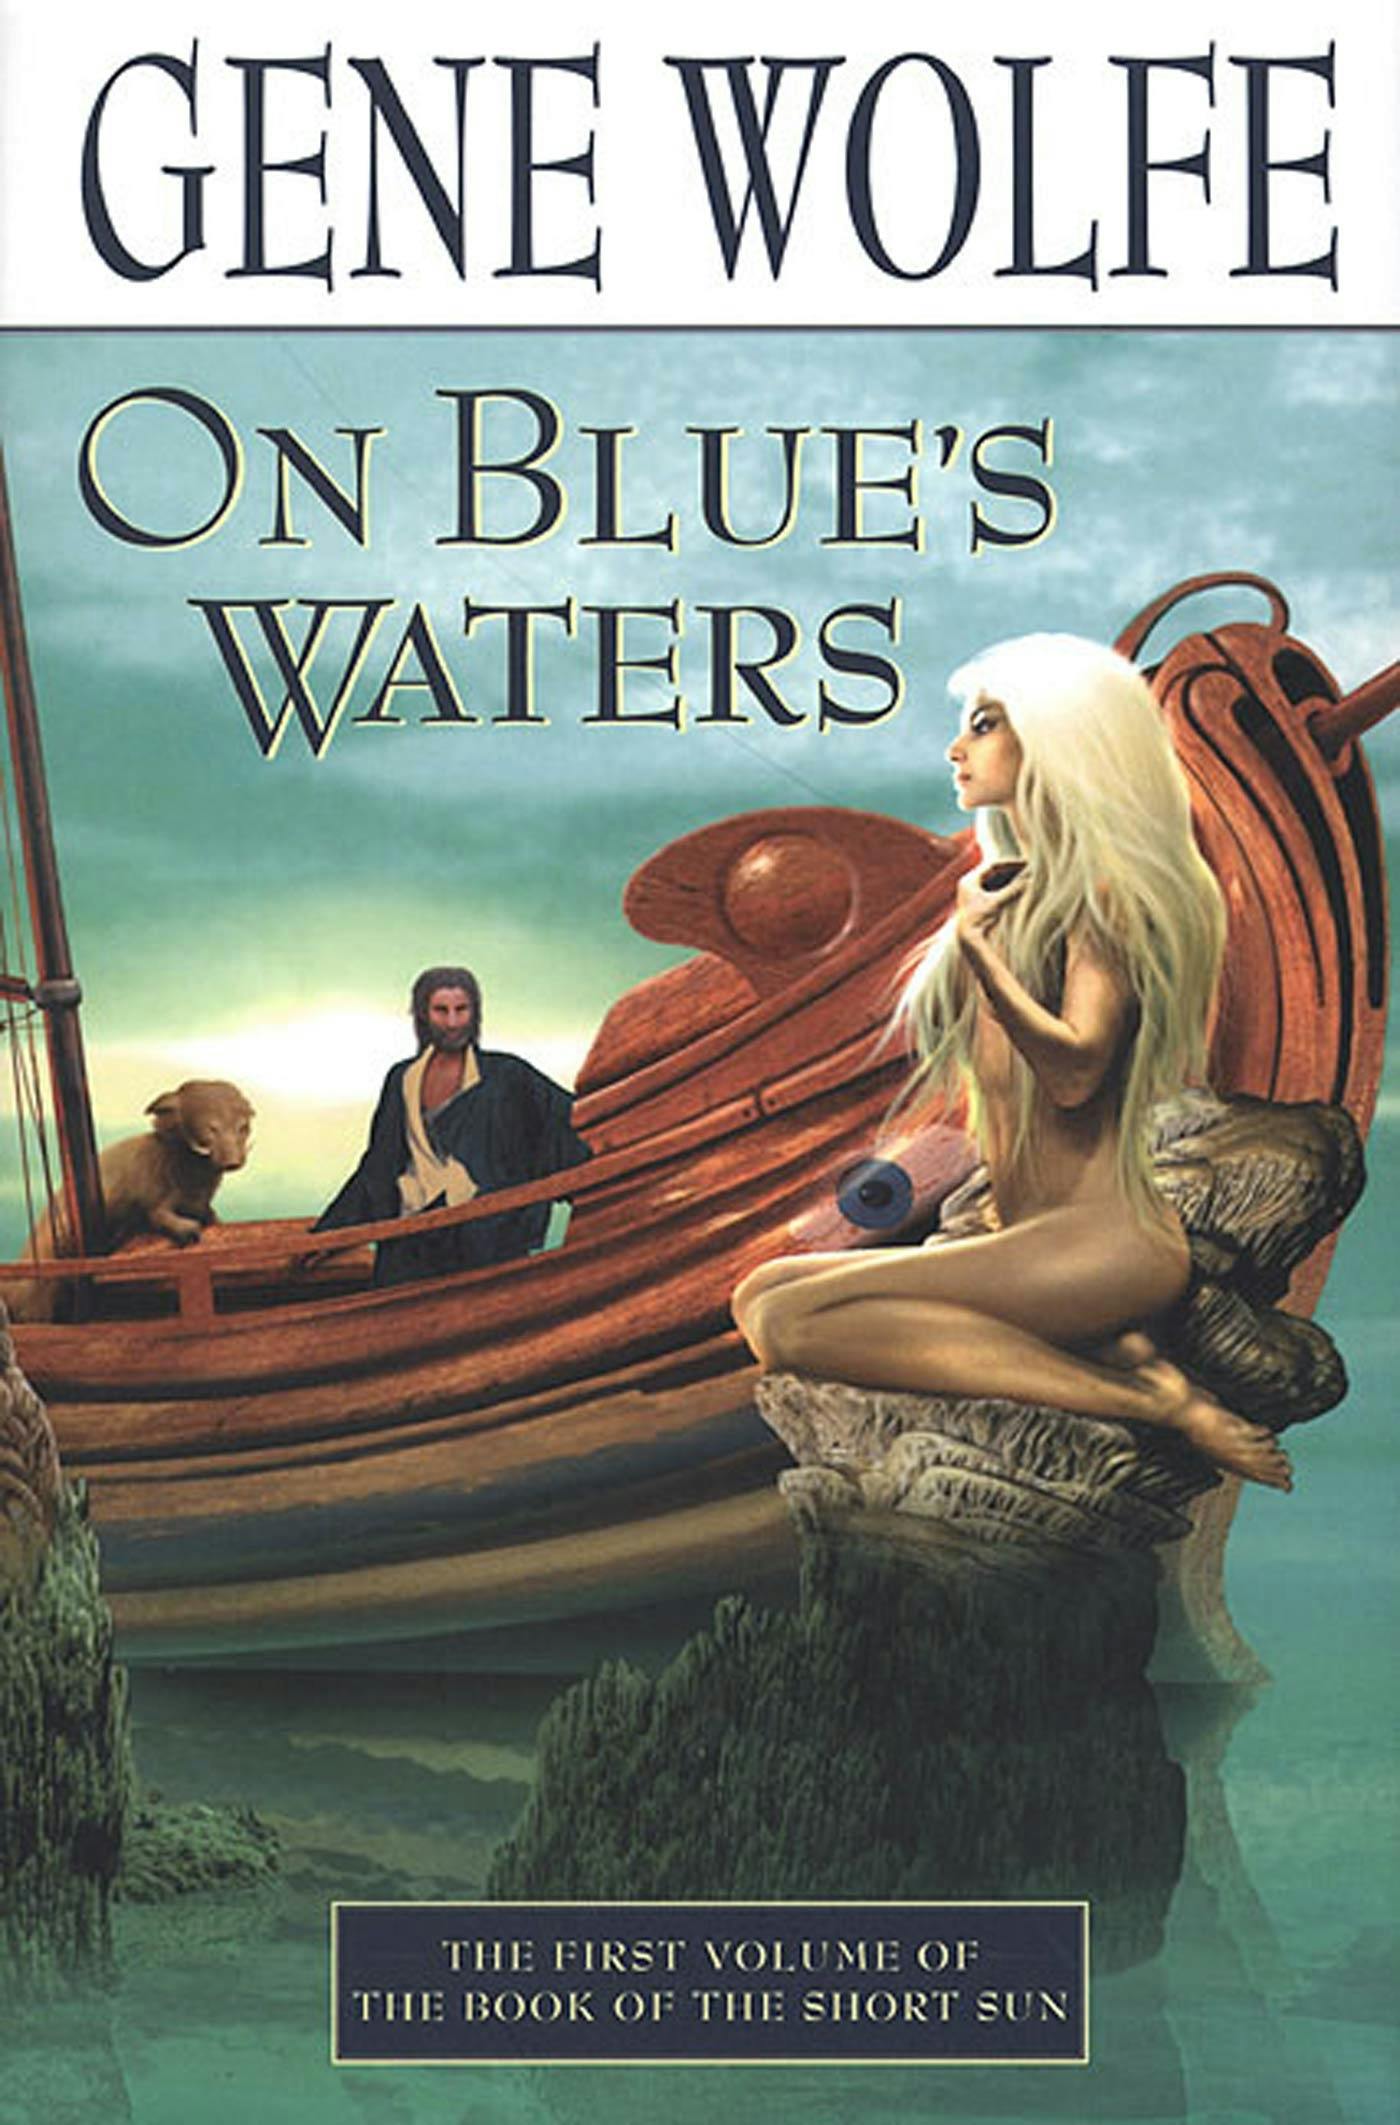 Cover for the book titled as: On Blue's Waters